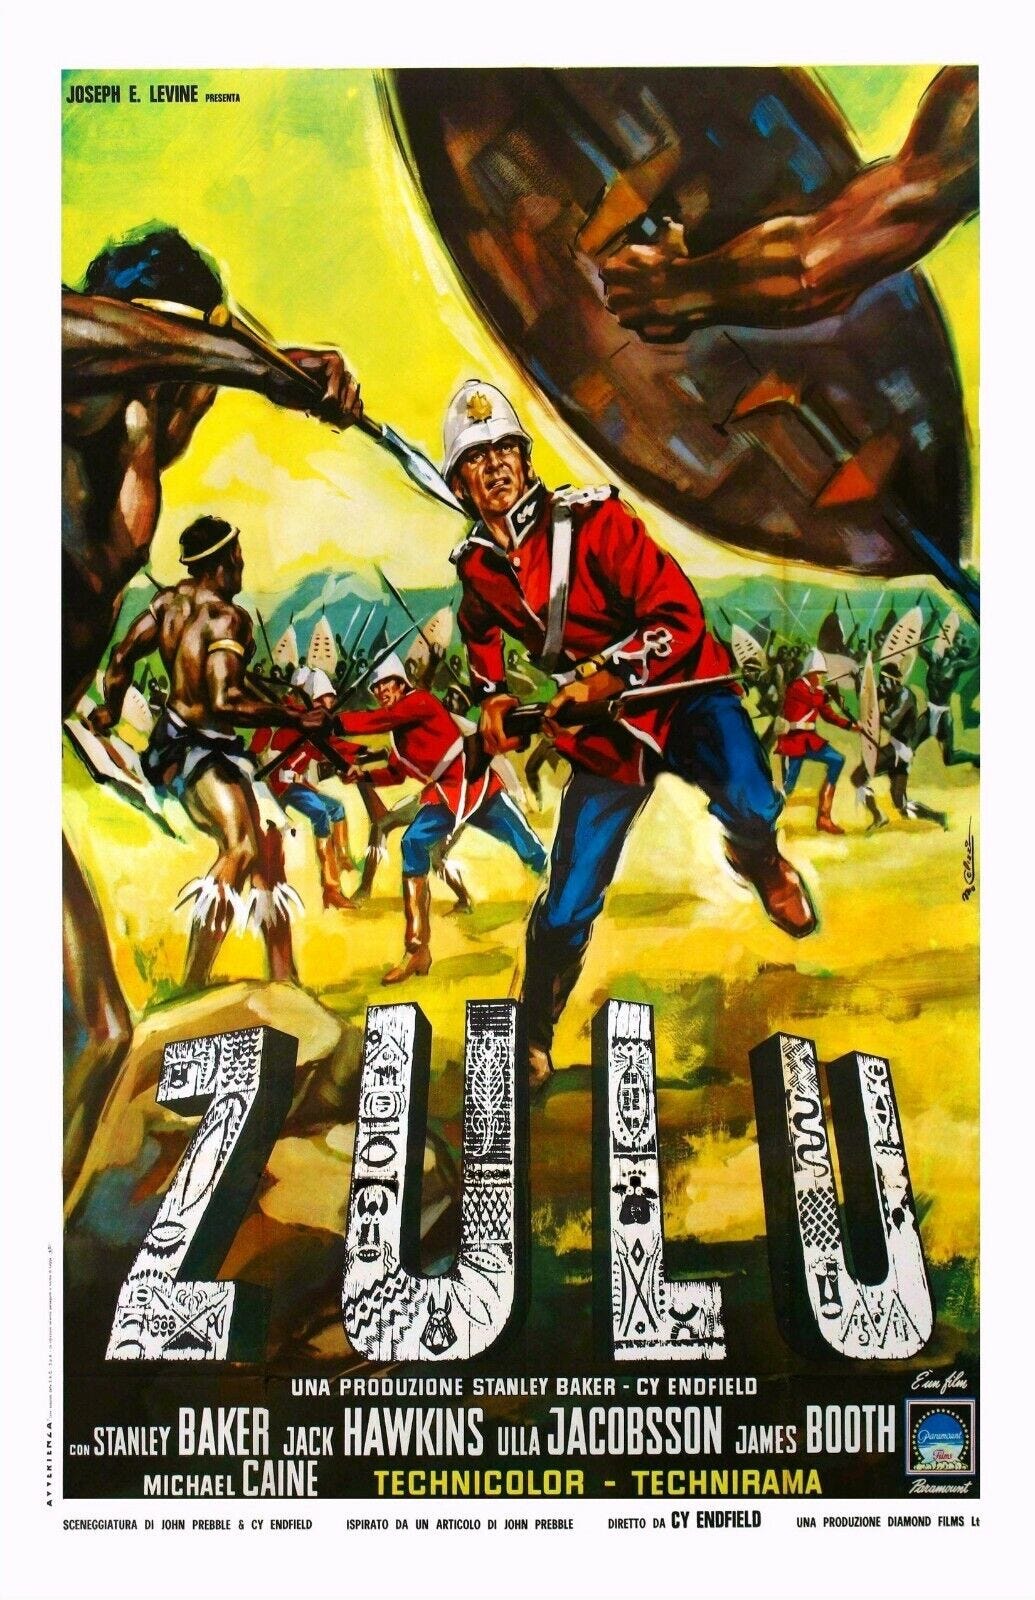 A 60s movie poster showing white British troops fighting Zulu warriors